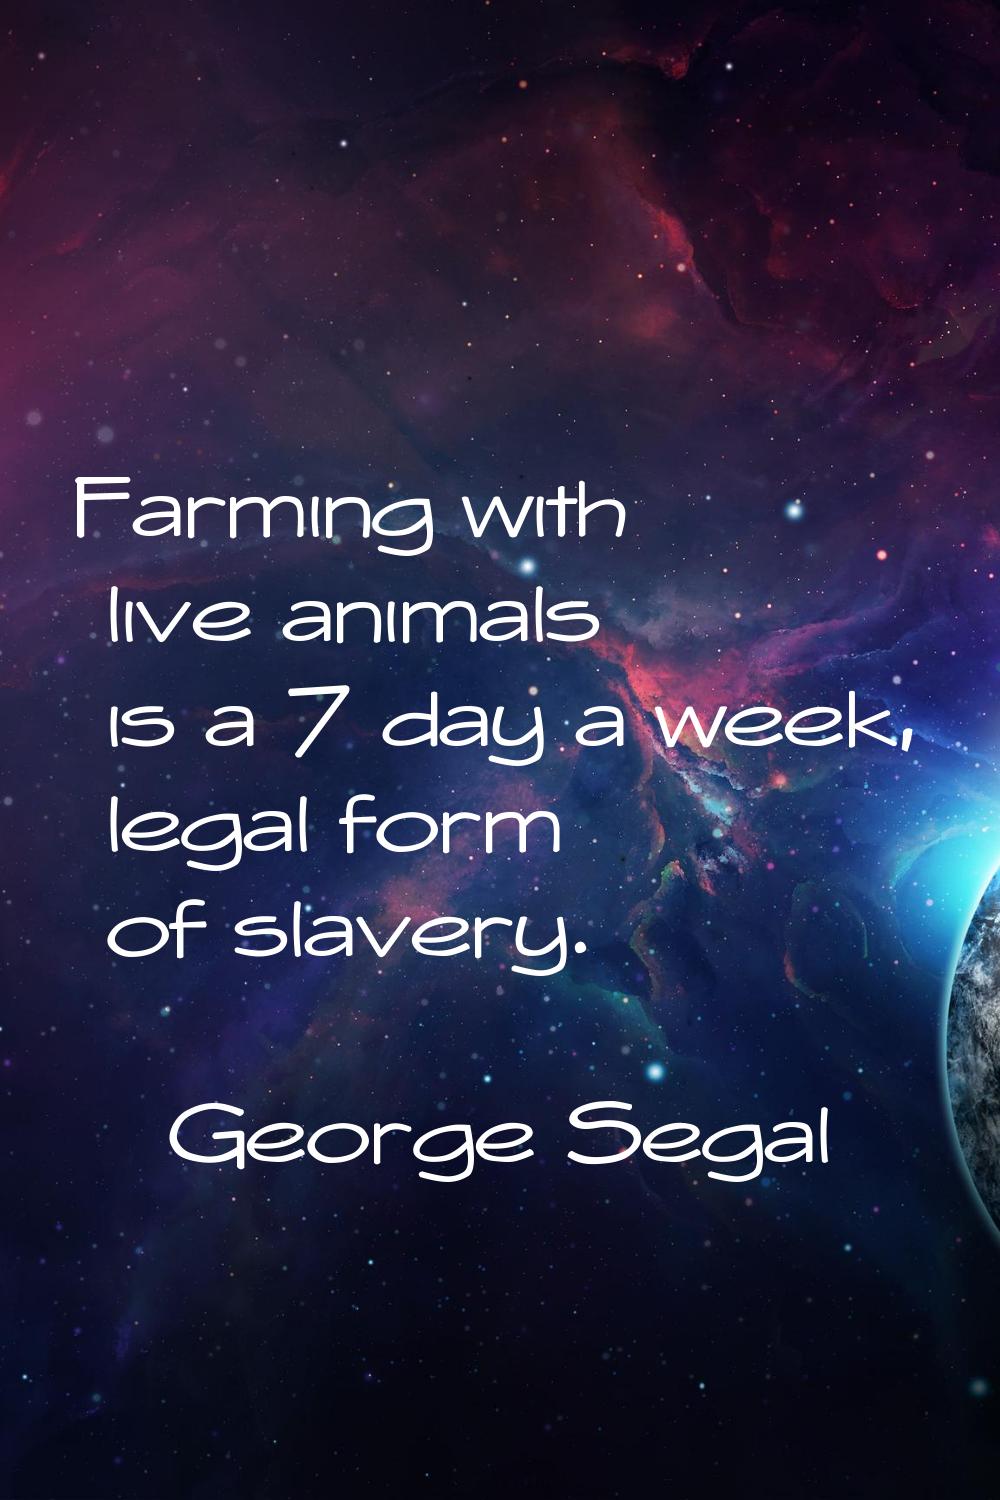 Farming with live animals is a 7 day a week, legal form of slavery.